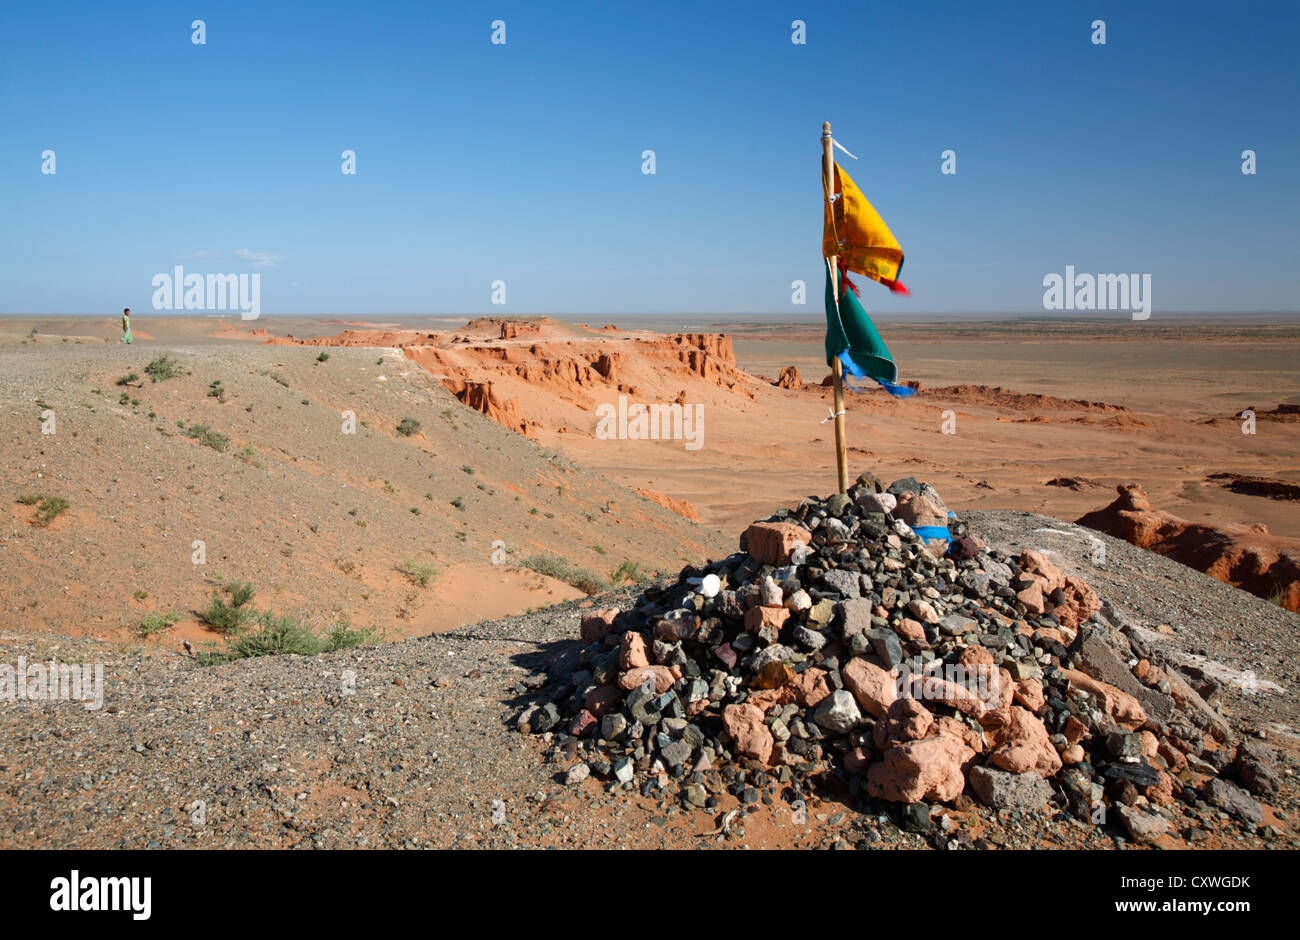 Ritual place obo overlooking erosion formations at Bayanzag flaming cliffs, Gobi desert, Mongolia Stock Photo